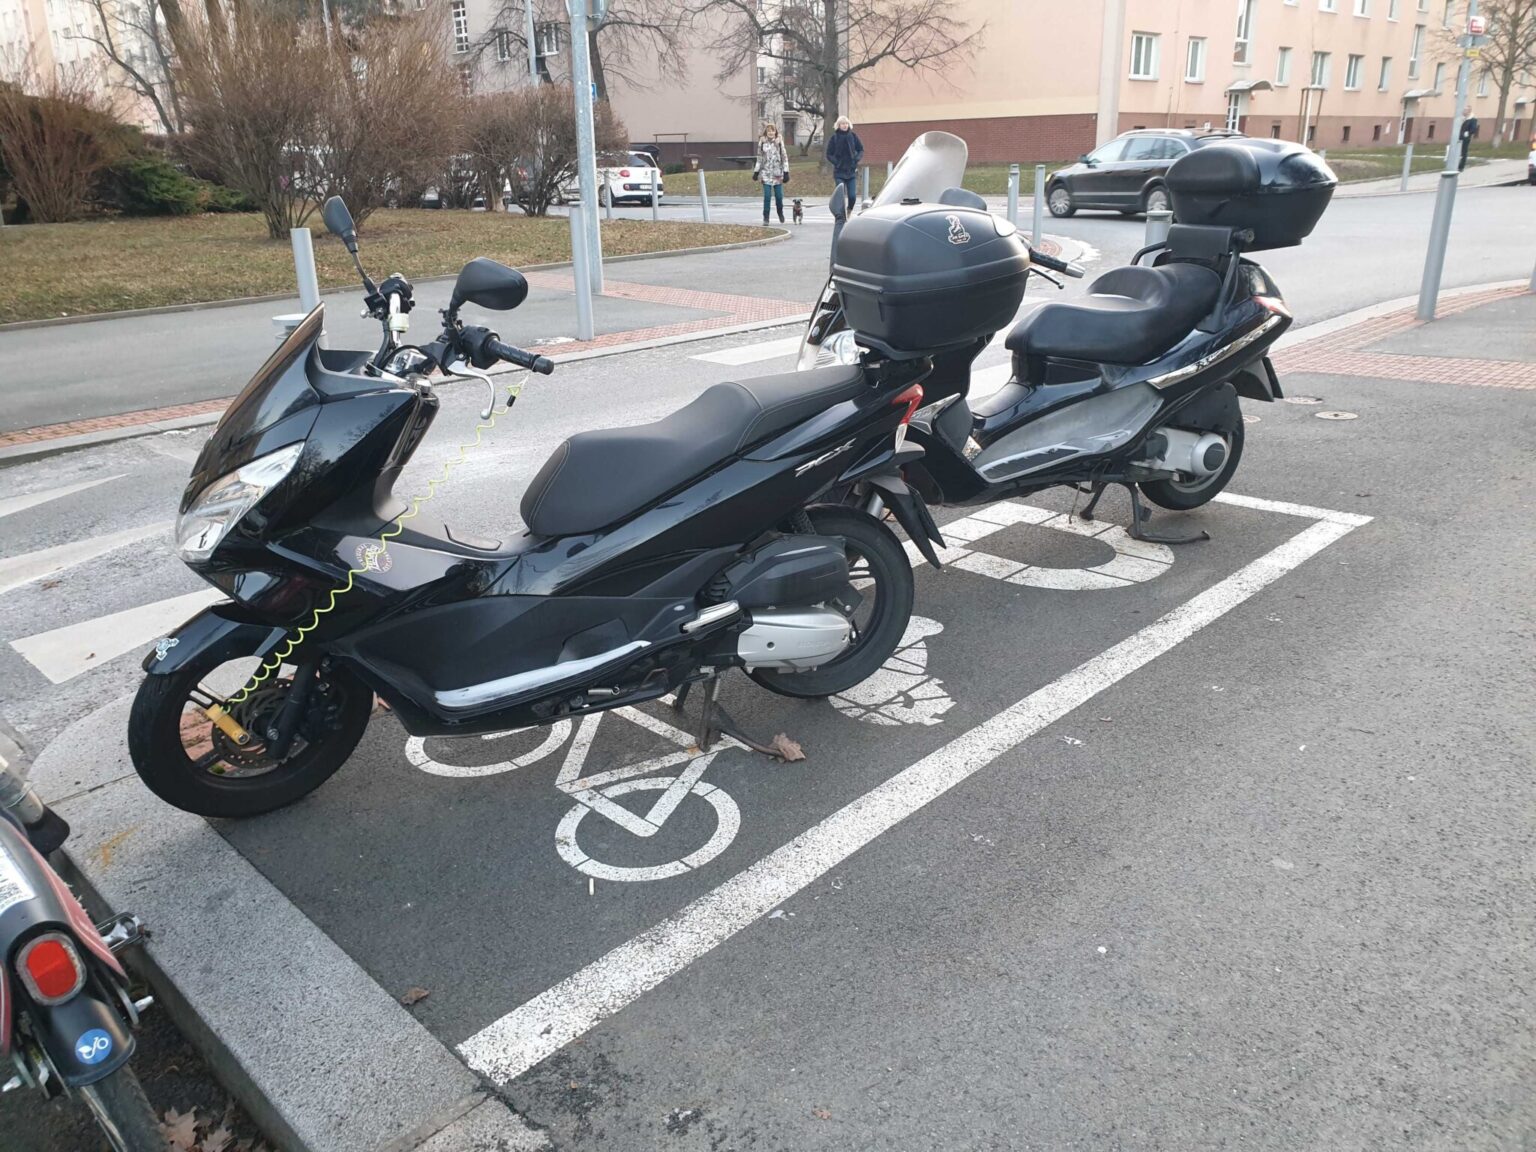 Great to see this precedent in my neighbourhood. In combination with a bike rack to lock my bike to, I would like there to be more parking spaces like this, and one closer to my home. Zdroj: Suzanne Verhaar